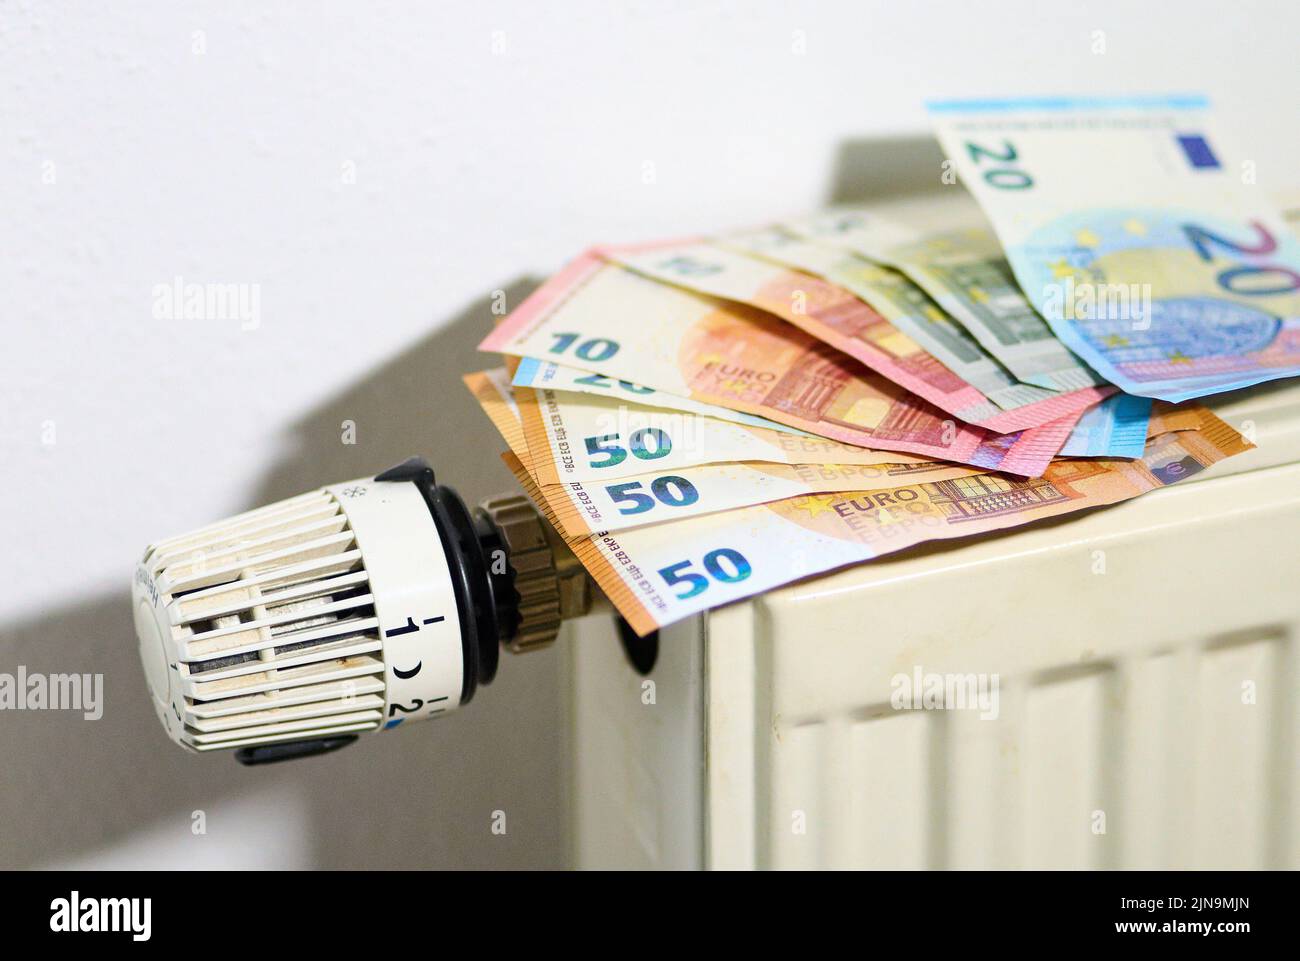 Symbolic image and illustration heating costs are constantly increasing due to the rise in the price of heating oil and gas at Aug 09, 2022 in  Marktoberdorf © Peter Schatz / Alamy Live News  MR=Yes, model released Stock Photo